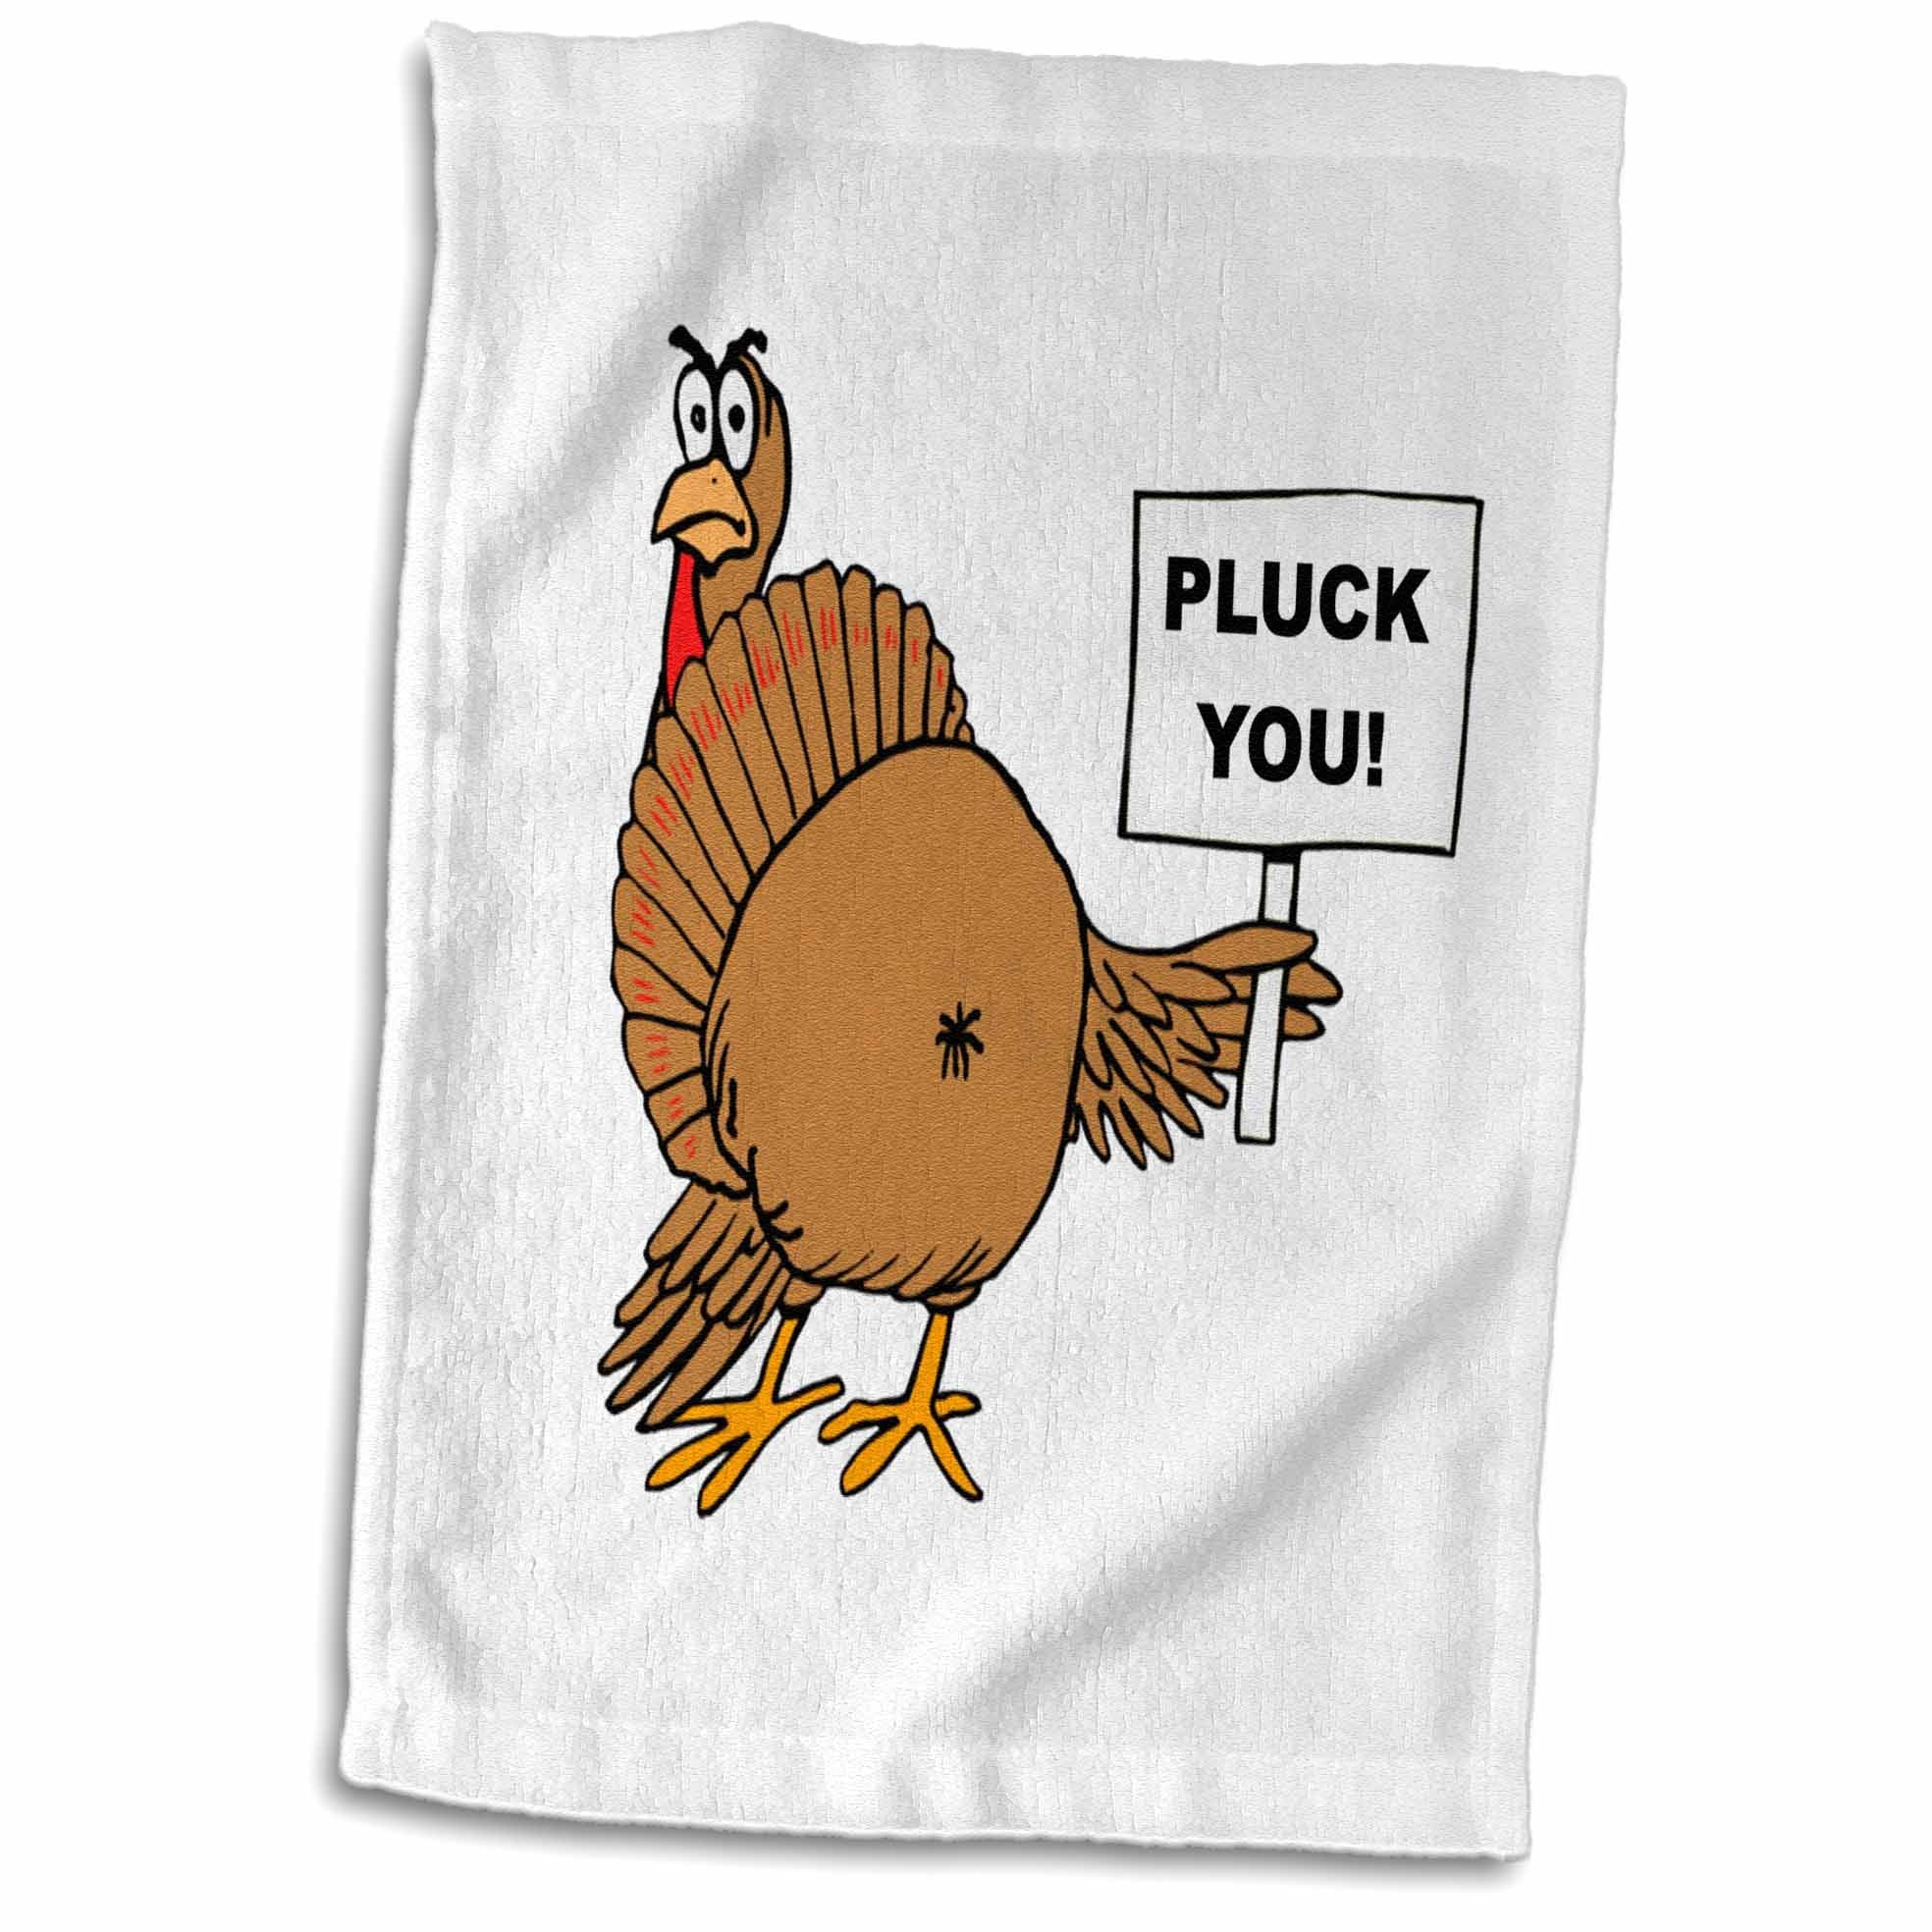 3drose Pluck You Naughty Turkey Joke Happy Thanksgiving Humor Funny Towel 15 By 22 Inch